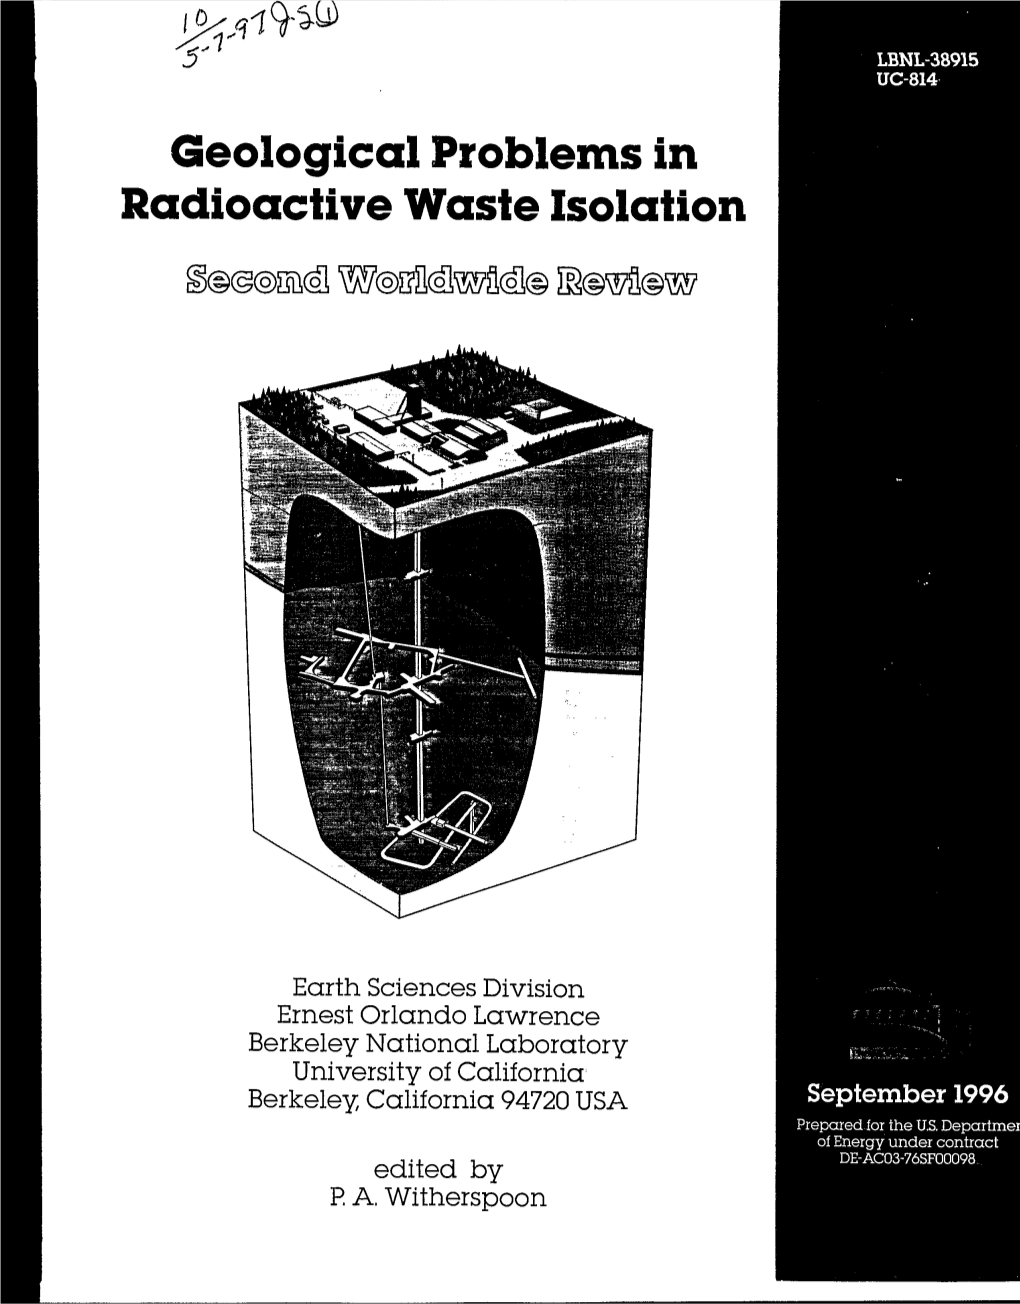 Geological Problems in Radioactive Waste Isolation